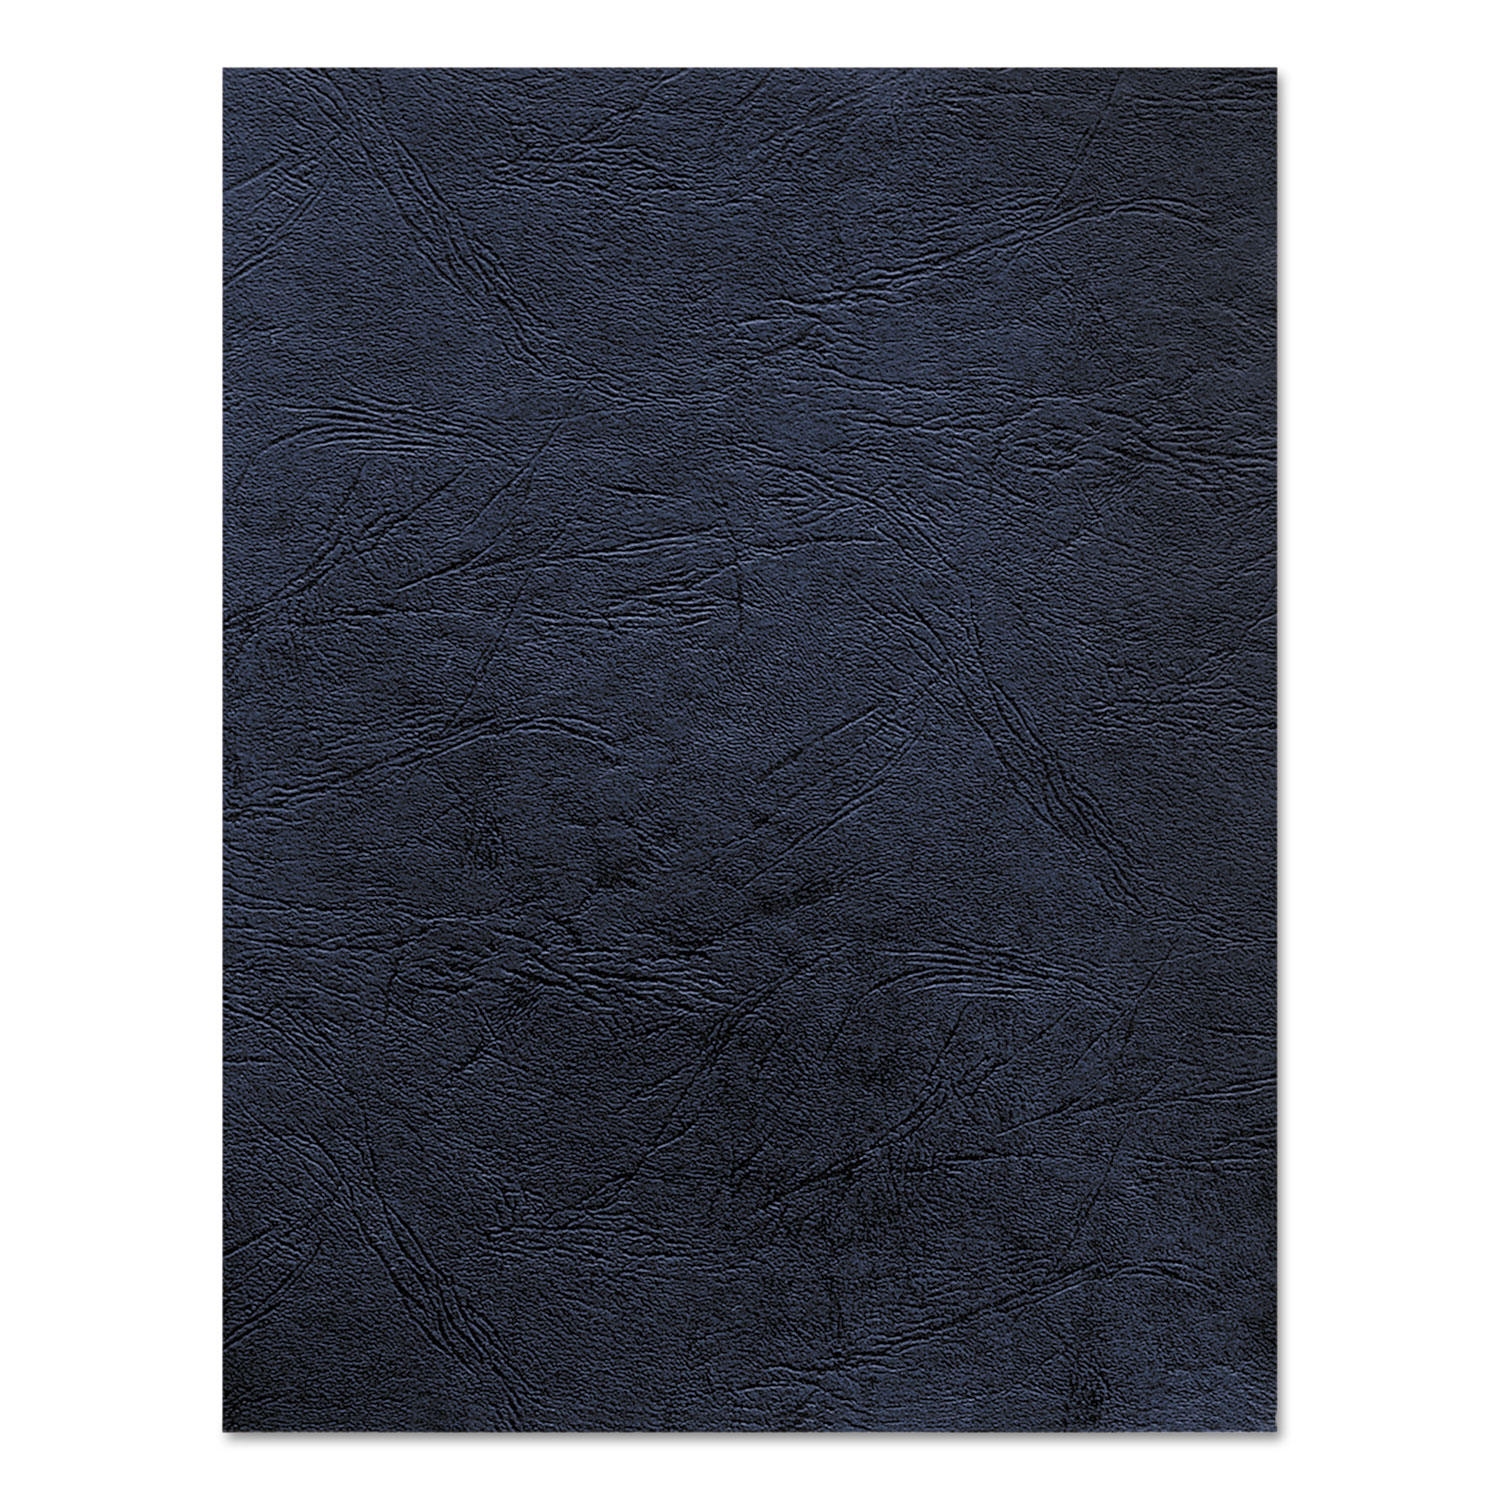 Classic Grain Texture Binding System Covers, 11 x 8-1/2, Navy, 50/Pack